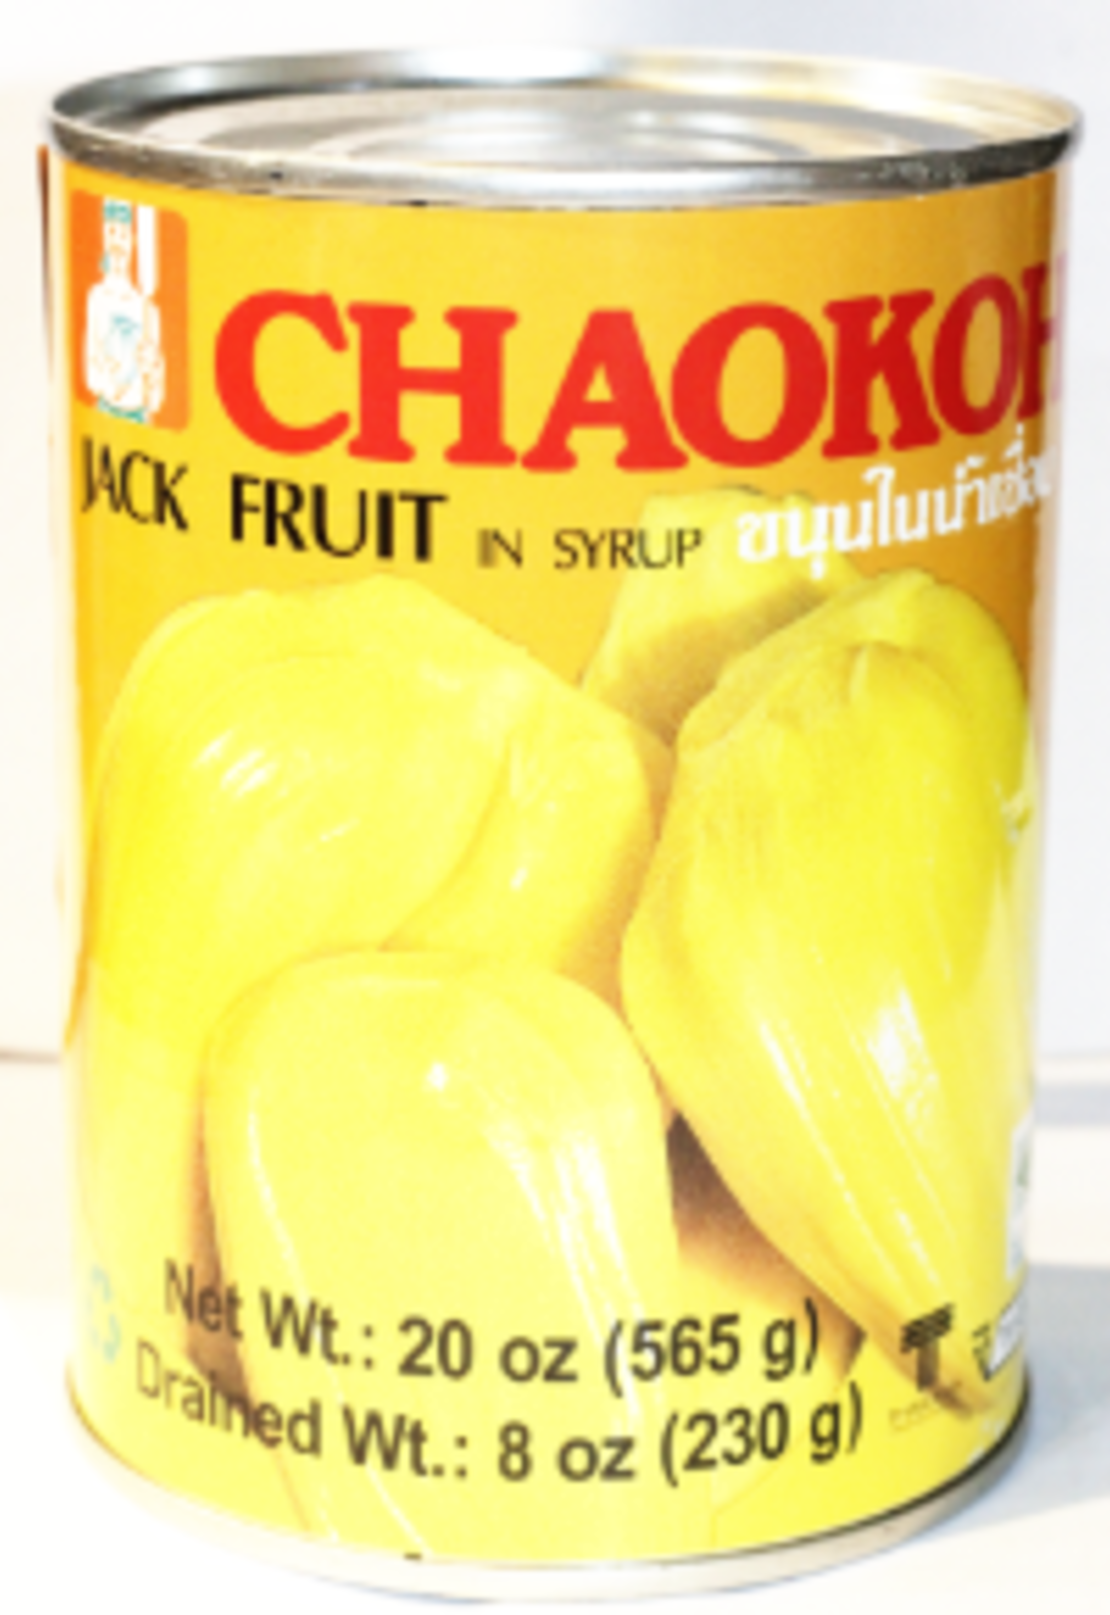 Chaokoh - Jack Fruit inSyrup 230g